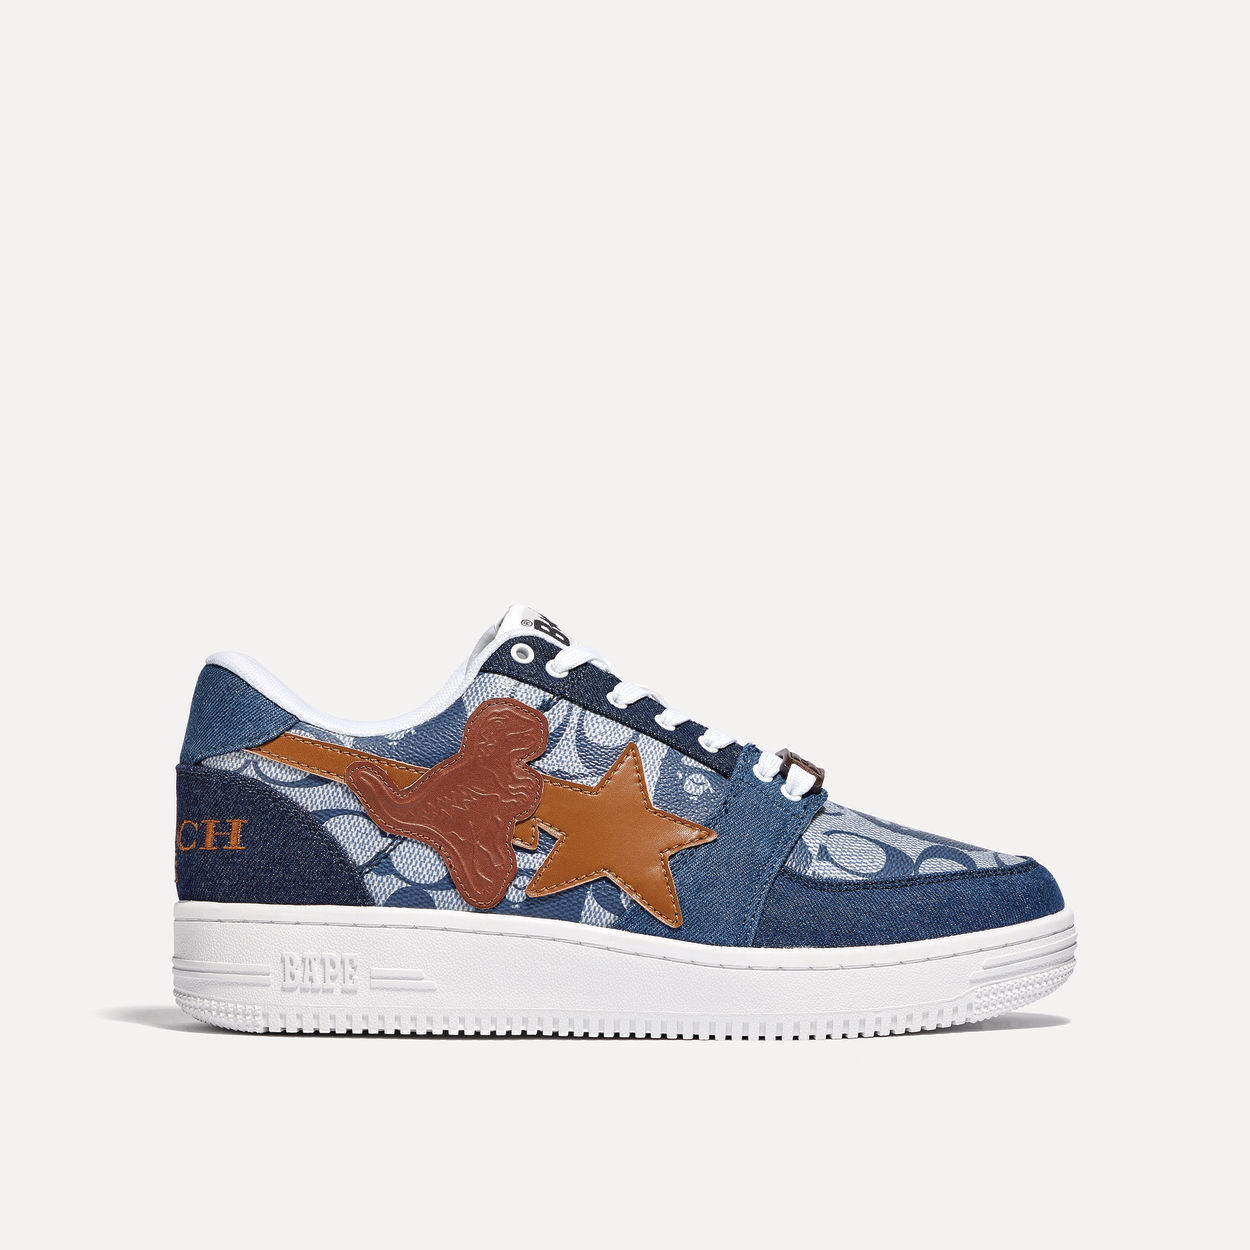 Where to buy Coach x Bape STA sneakers in Singapore